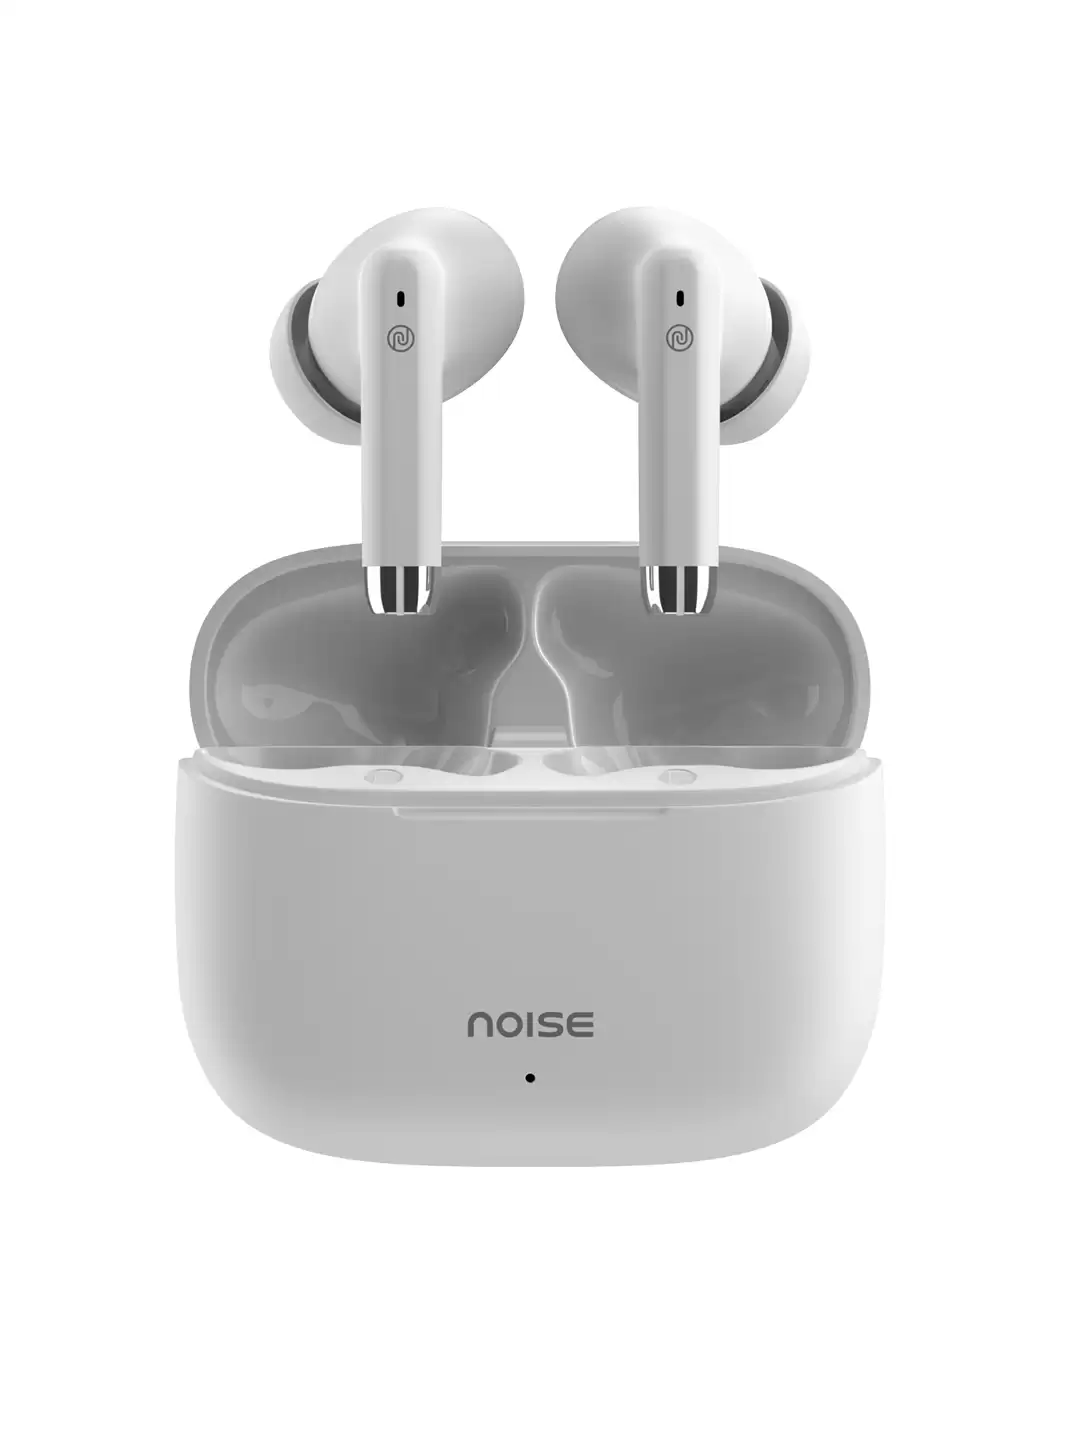 Get 77% Off On Noise Earbuds With This Discount Coupon At Myntra